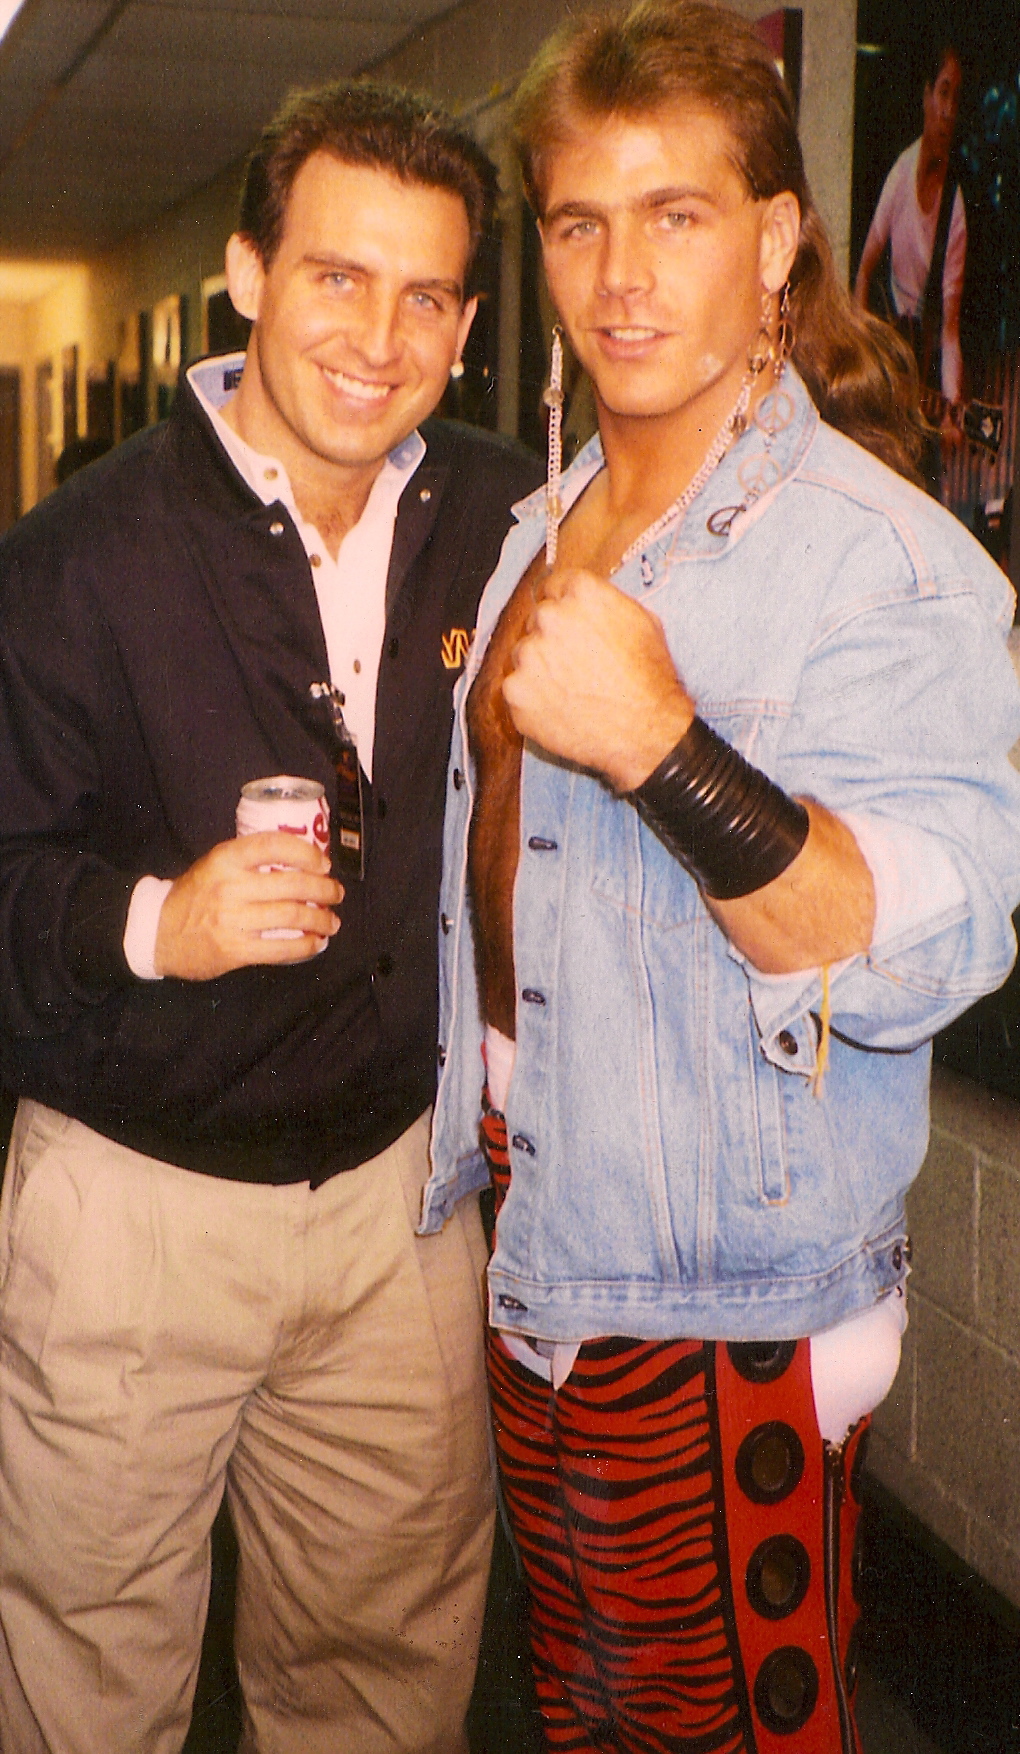 Mark Fauser with Shawn Michaels backstage at Wrestlemania